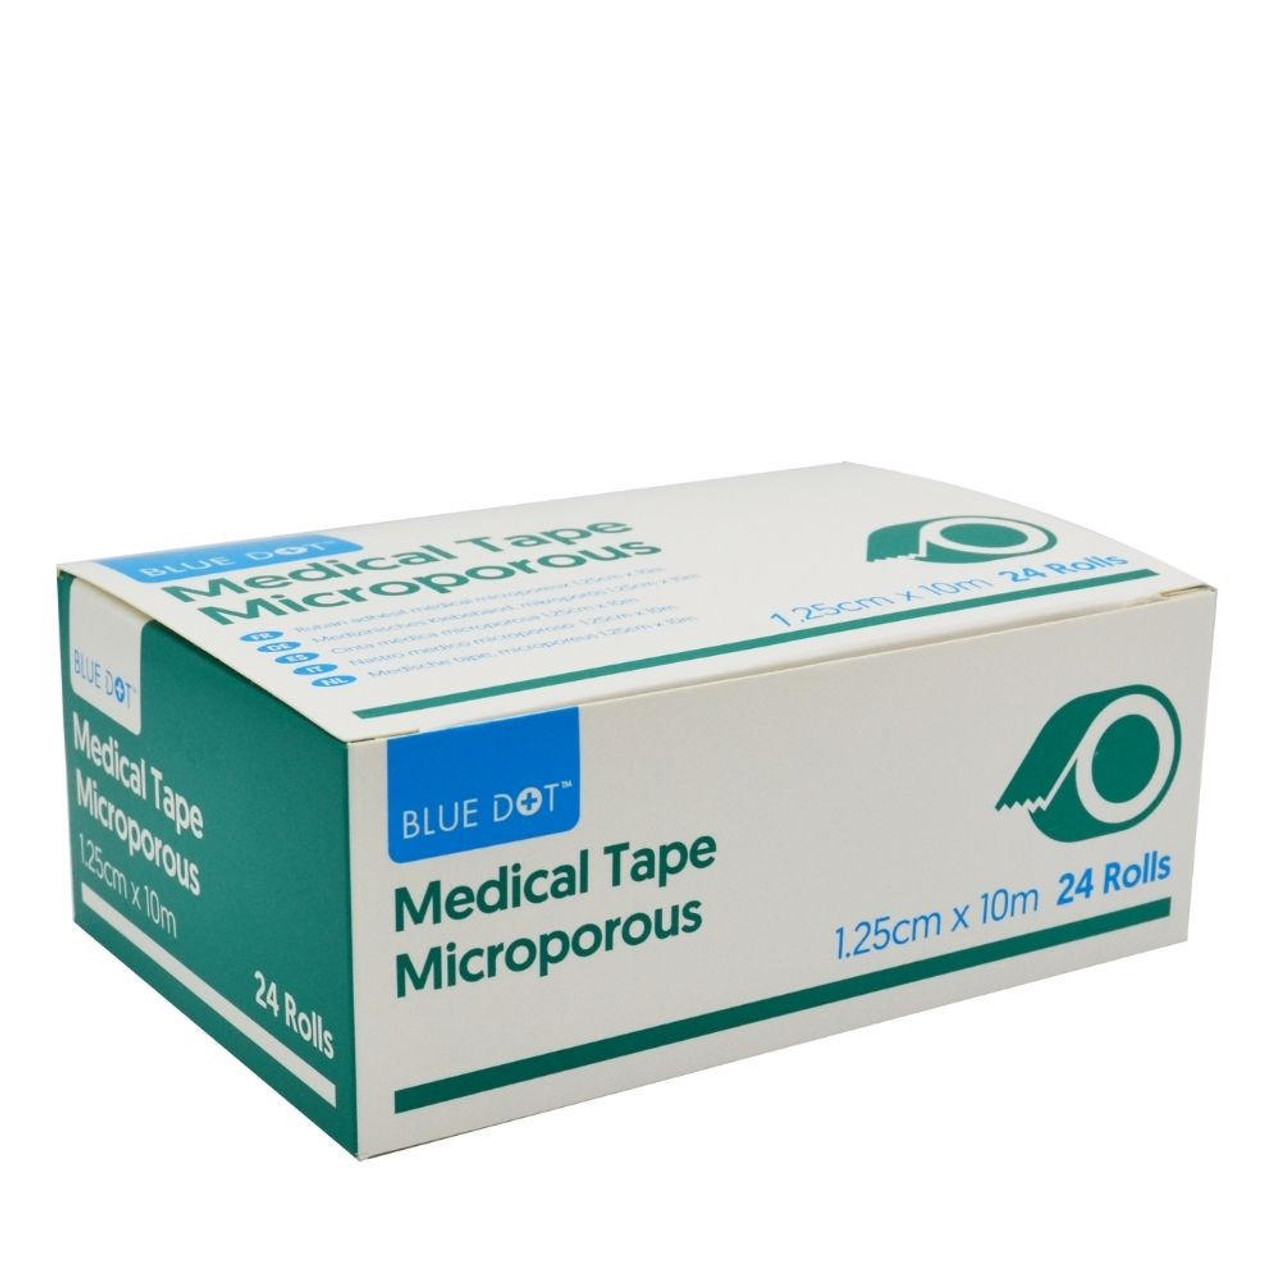 Microporous Medical Tape 1.25cm x 10m Box 24 Rolls or Blue Dot